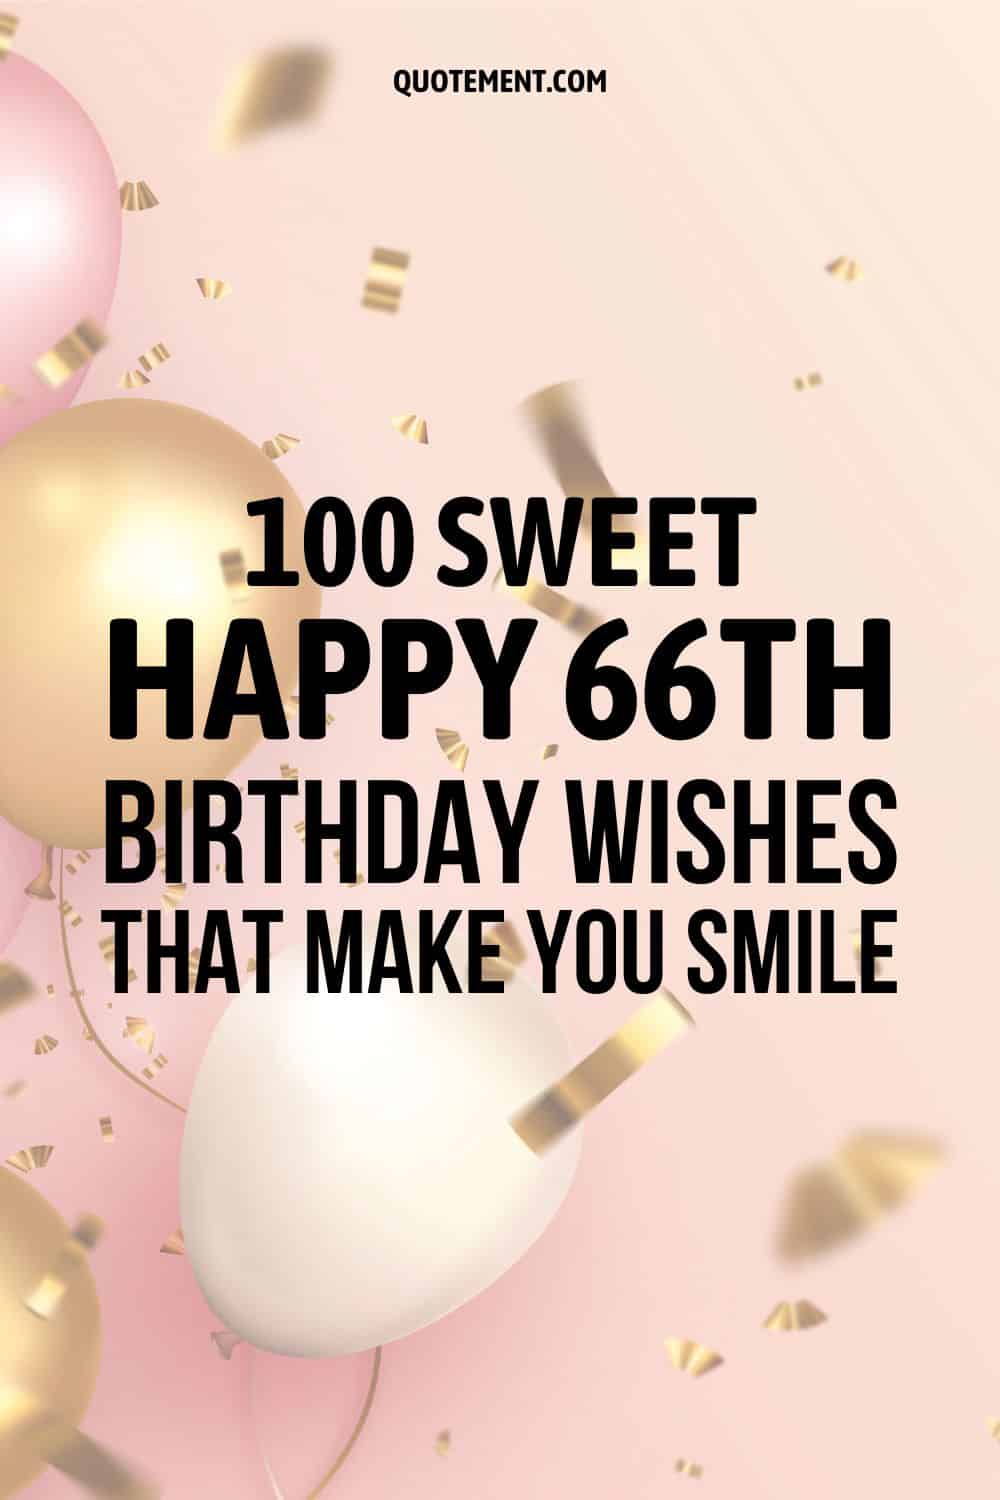 100 Sweet Happy 66th Birthday Wishes That Make You Smile
